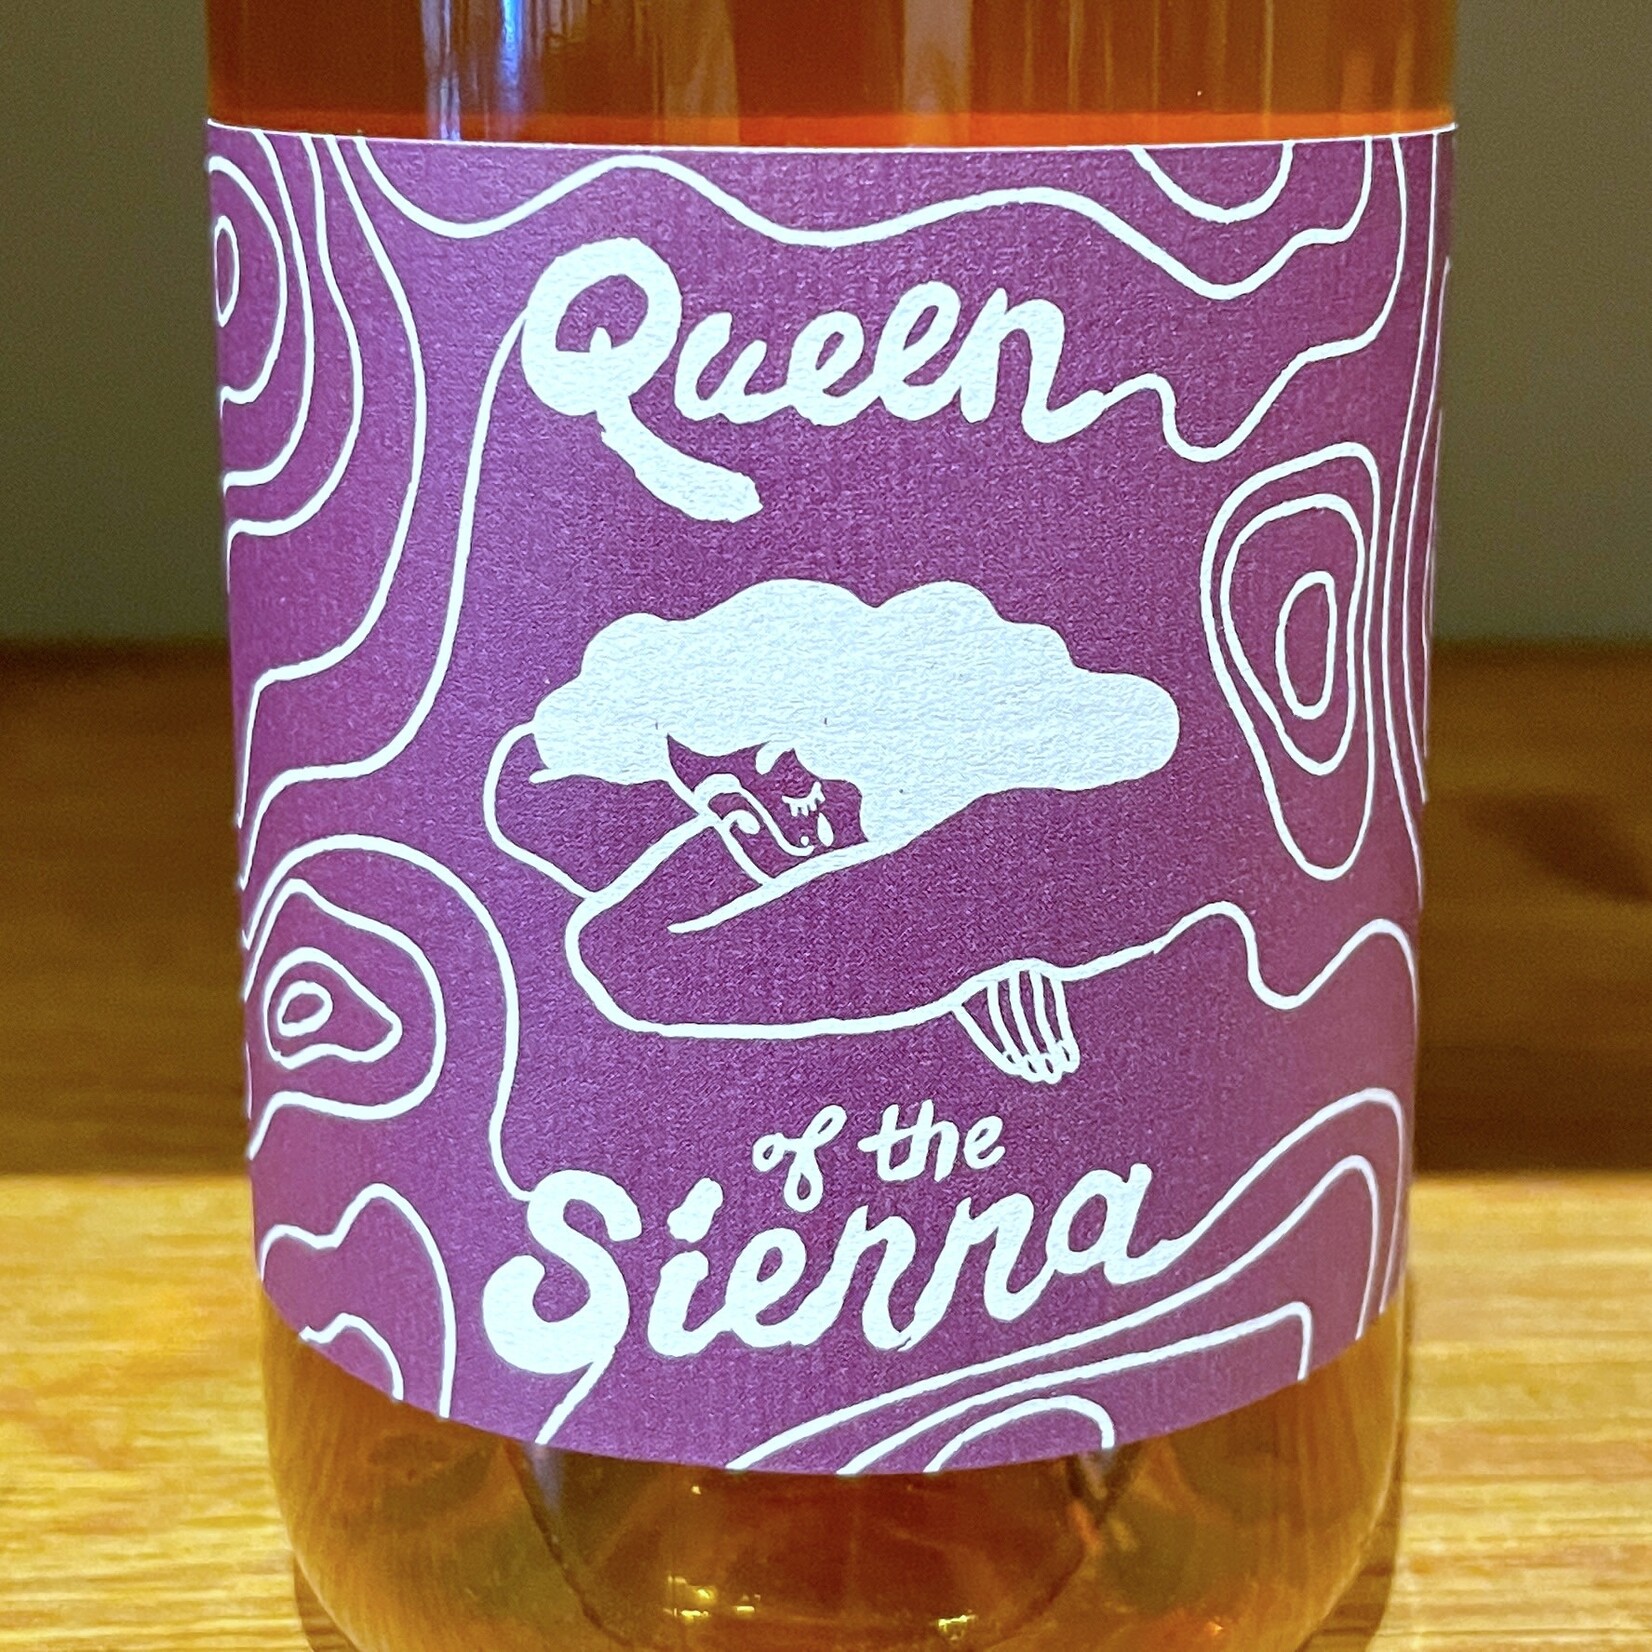 USA 2022 Forlorn Hope “Queen of the Sierra” Estate Amber Wine